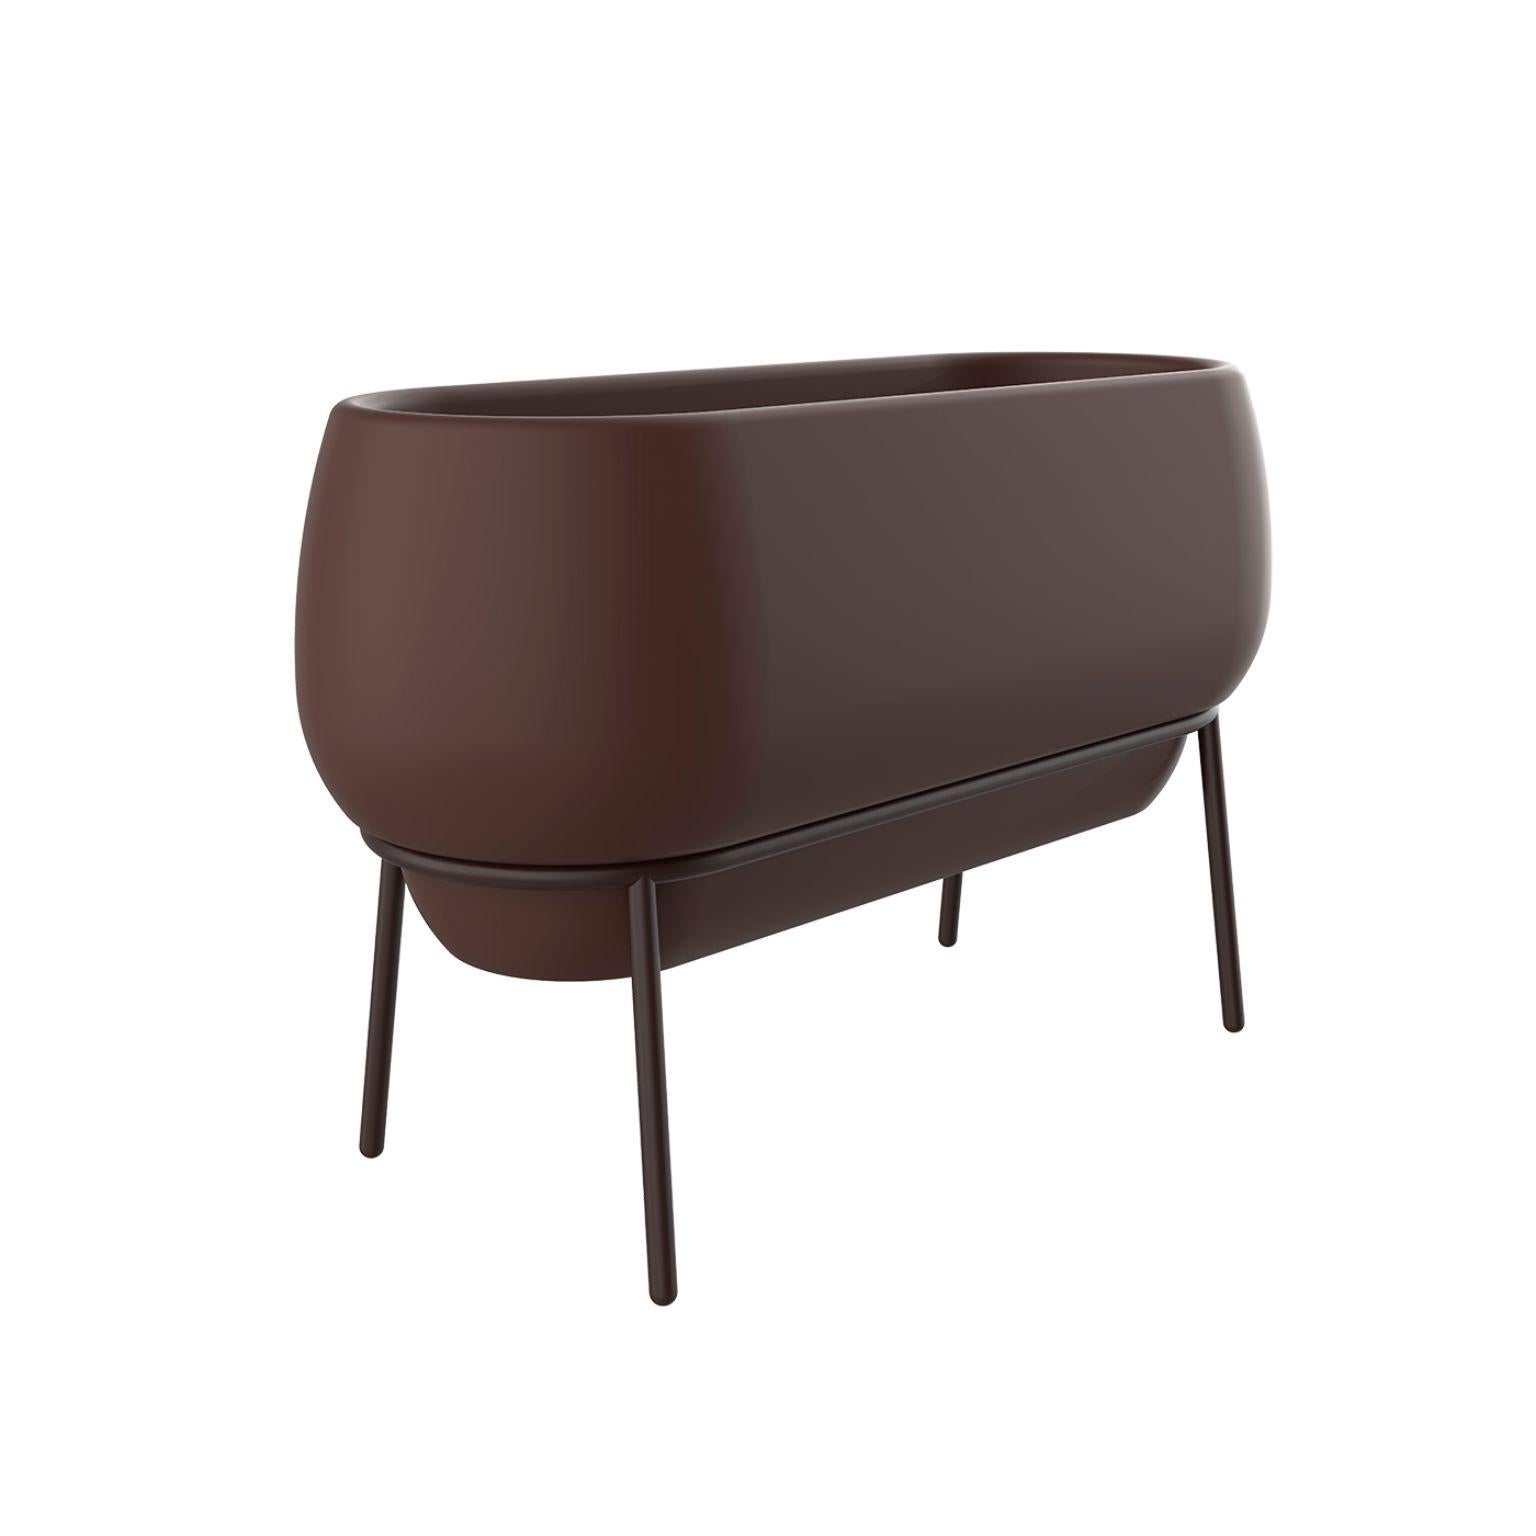 Lace chocolate planter by Mowee
Dimensions: D50 x W120 x H76 cm
Material: Polyethylene and stainless steel.
Weight: 13.5 kg.
Also available in different colours and finishes. (Lacquered or retroilluminated).

Lace is a collection of furniture